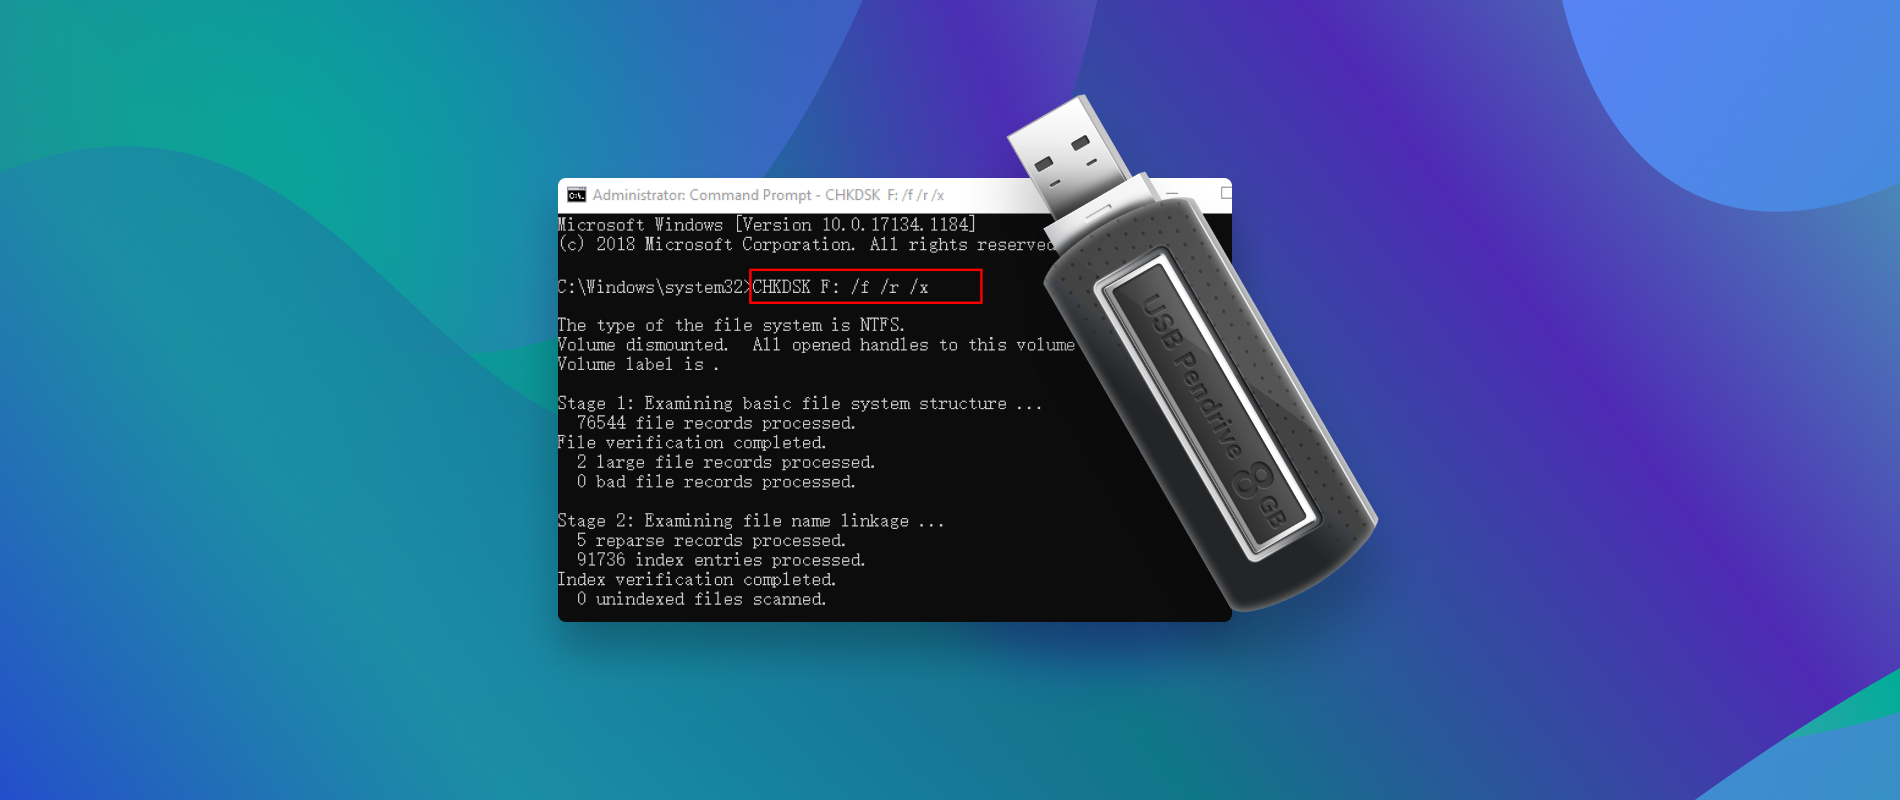 Verify USB drive is formatted correctly
Check if USB drive is set to "Hidden" in Windows